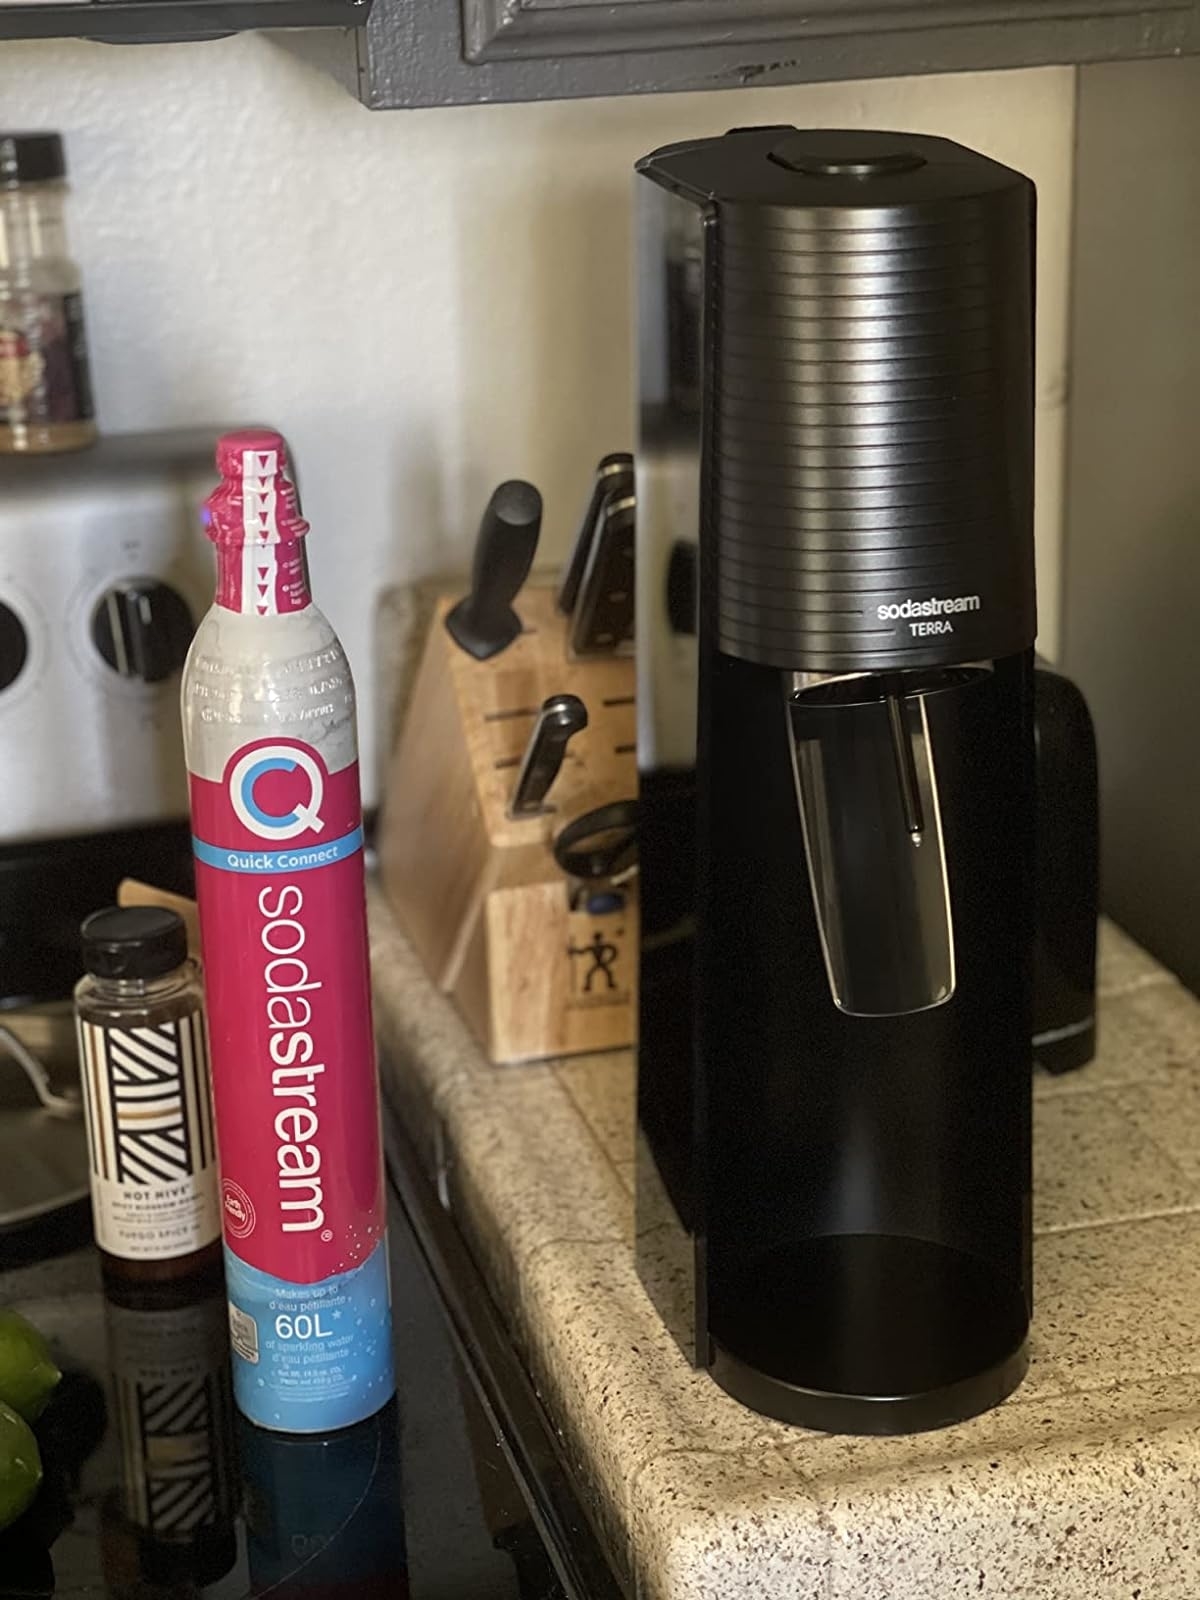 a reviewer photo of the Terra device and a sodastream canister